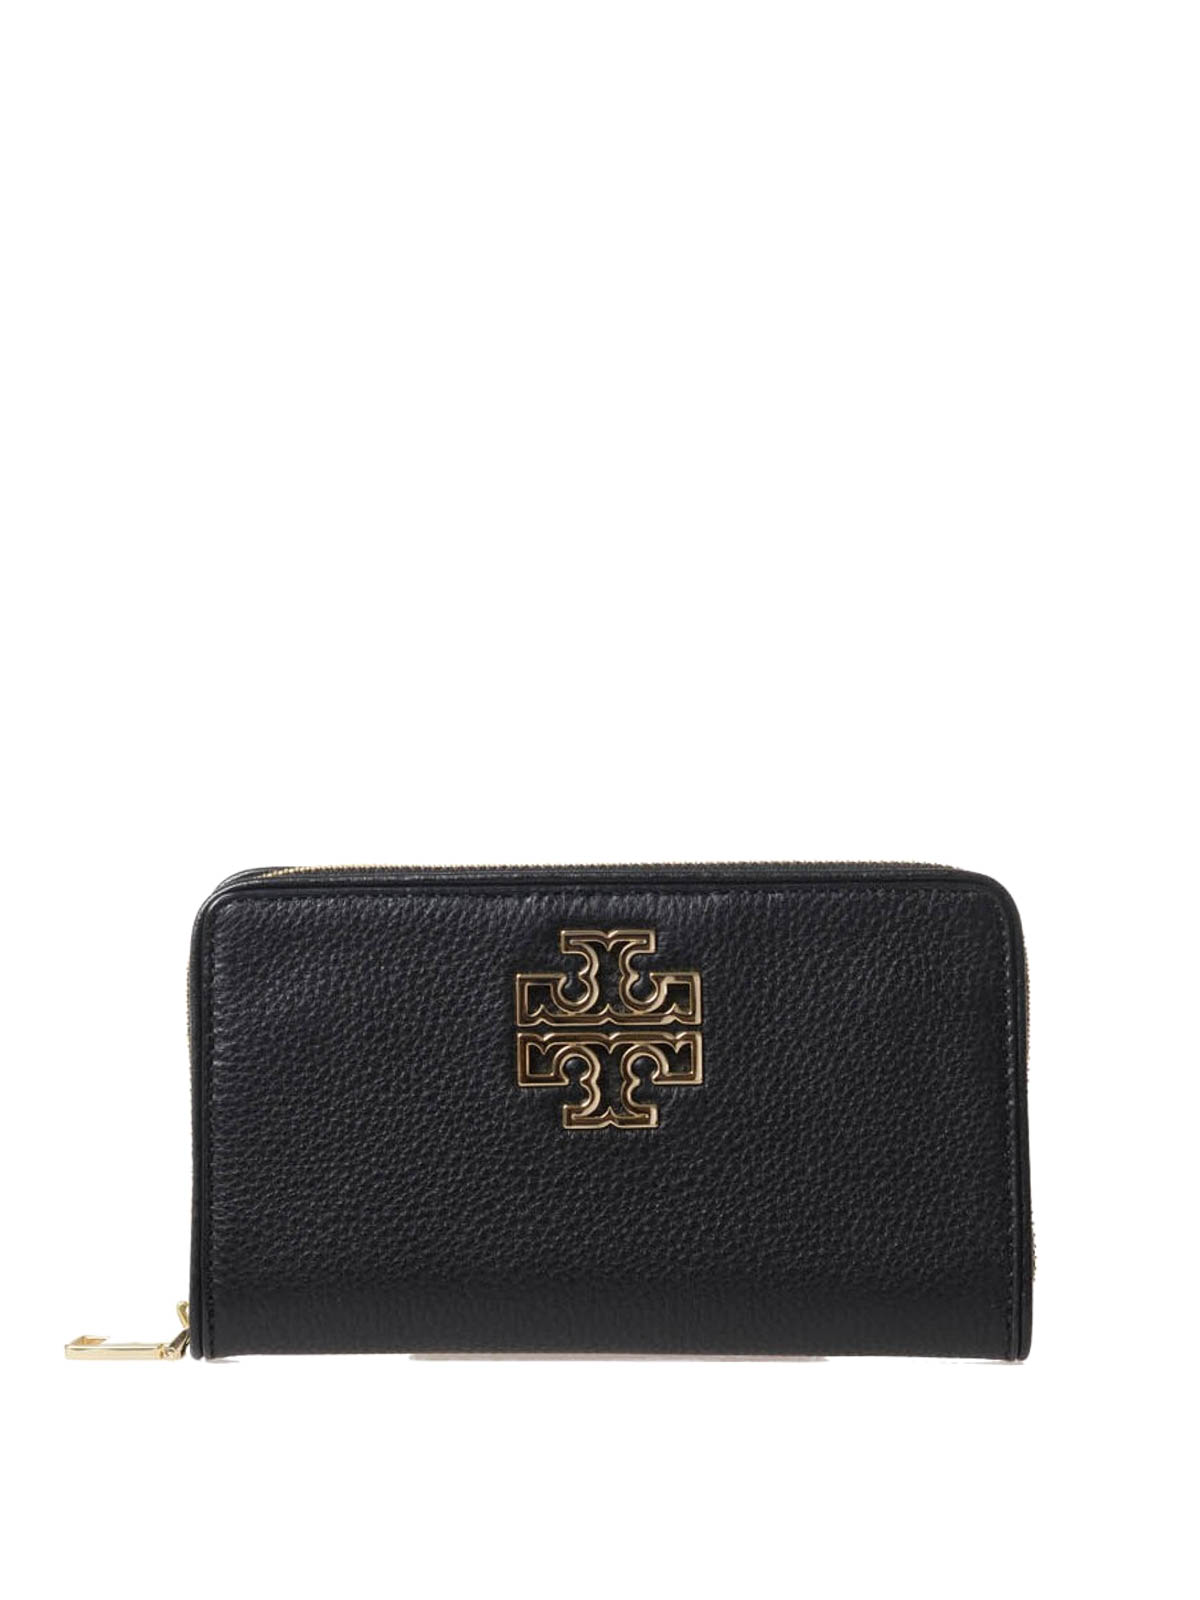 Tory Burch, Bags, Tory Burch Black Leather Wallet